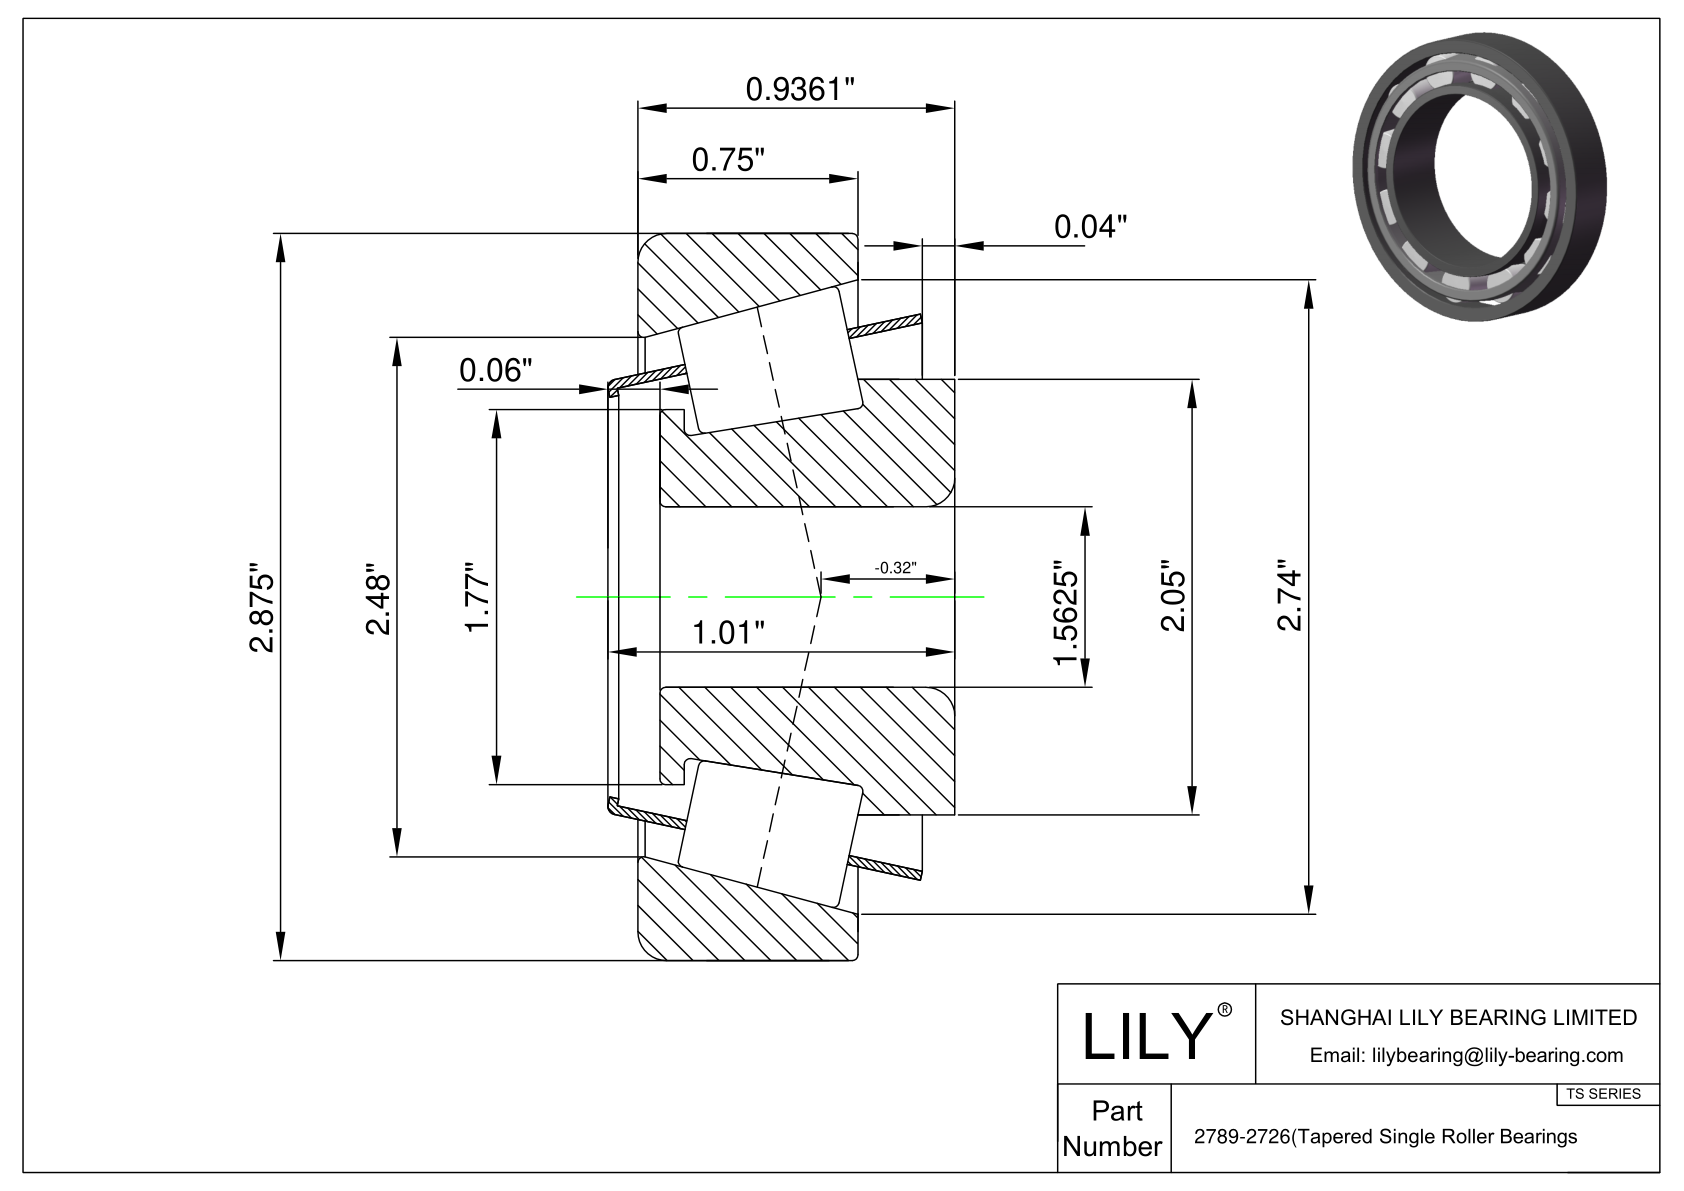 2789-2726 TS (Tapered Single Roller Bearings) (Imperial) cad drawing